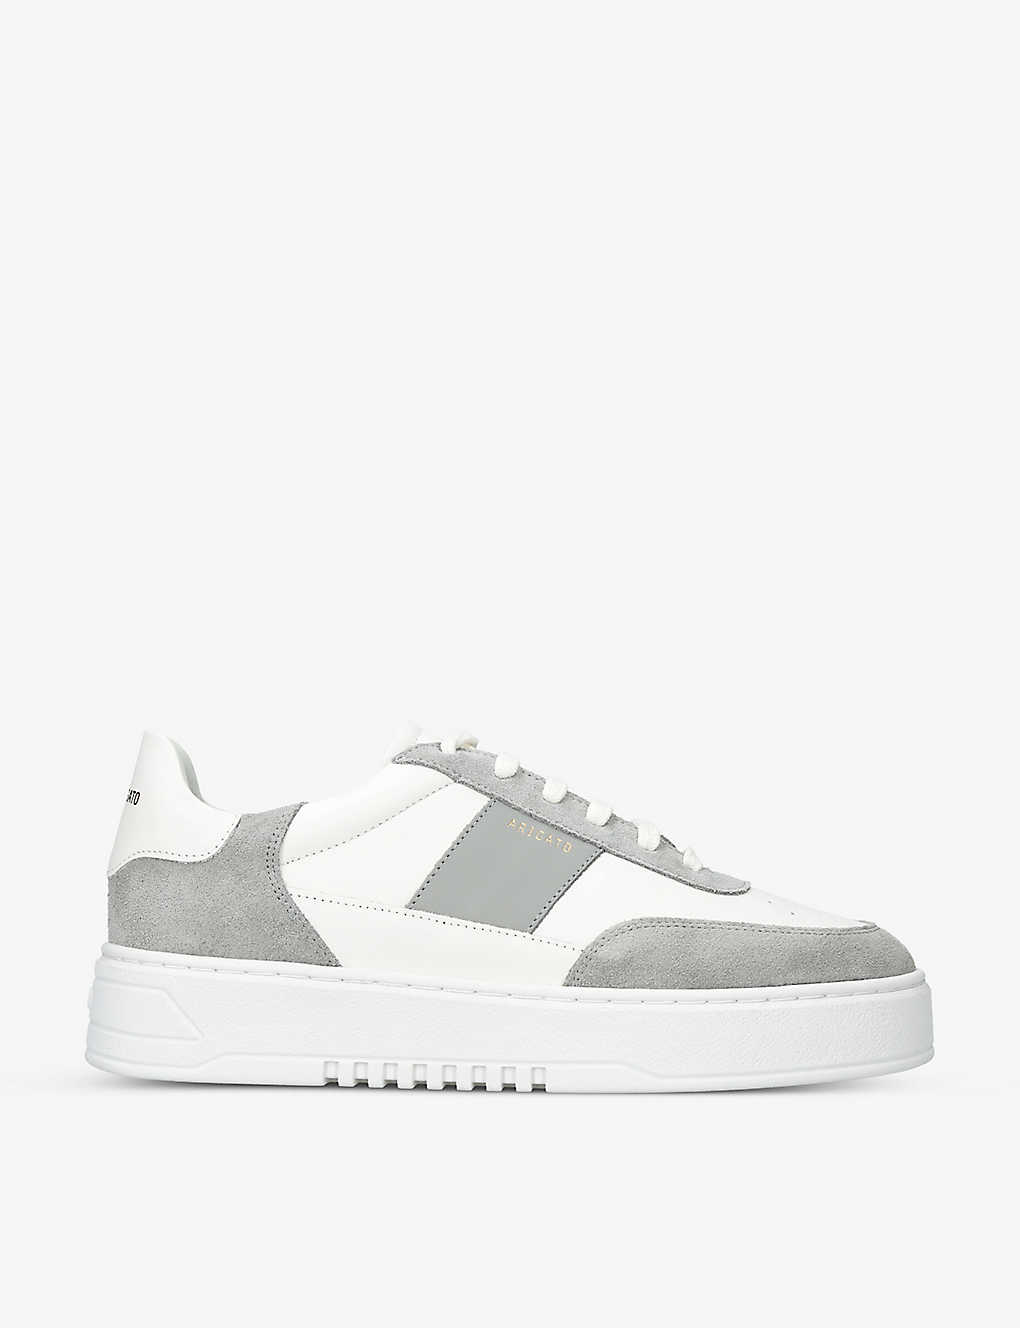 Shop Axel Arigato Men's White/comb Orbit Suede And Leather Platform Trainers